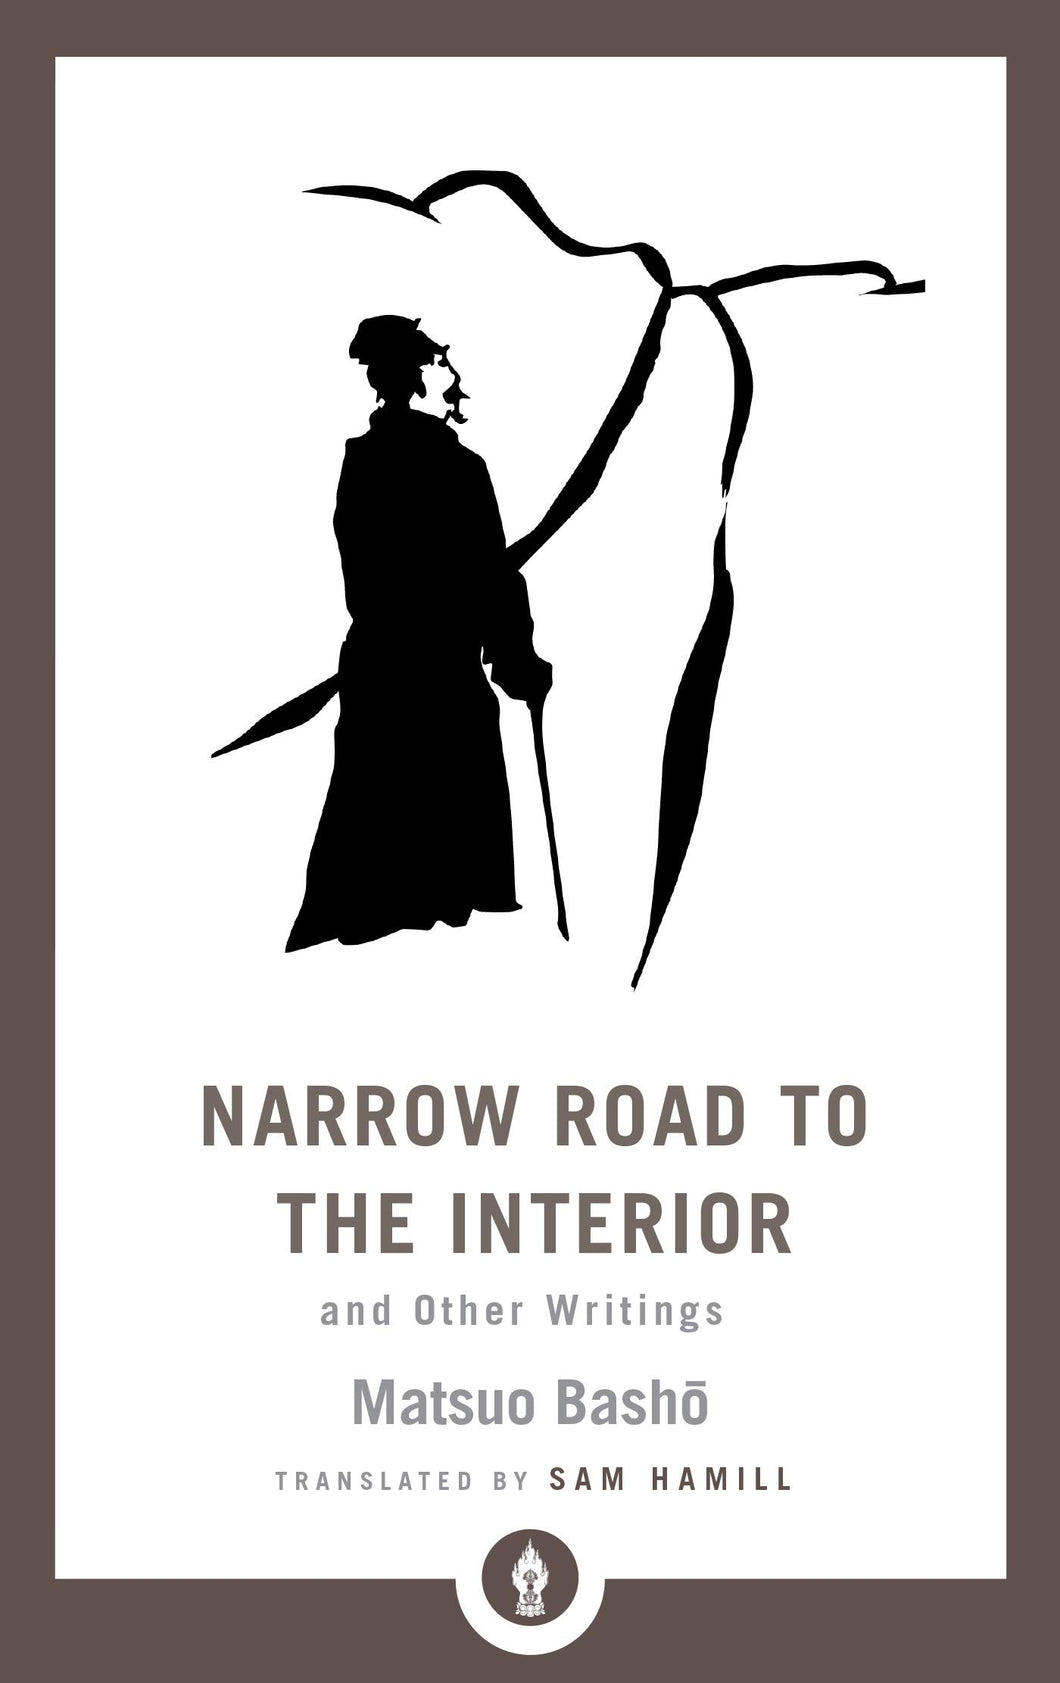 Narrow Road to the Interior: And Other Writings [Matsuo Bashō, translated by Sam Hamill]